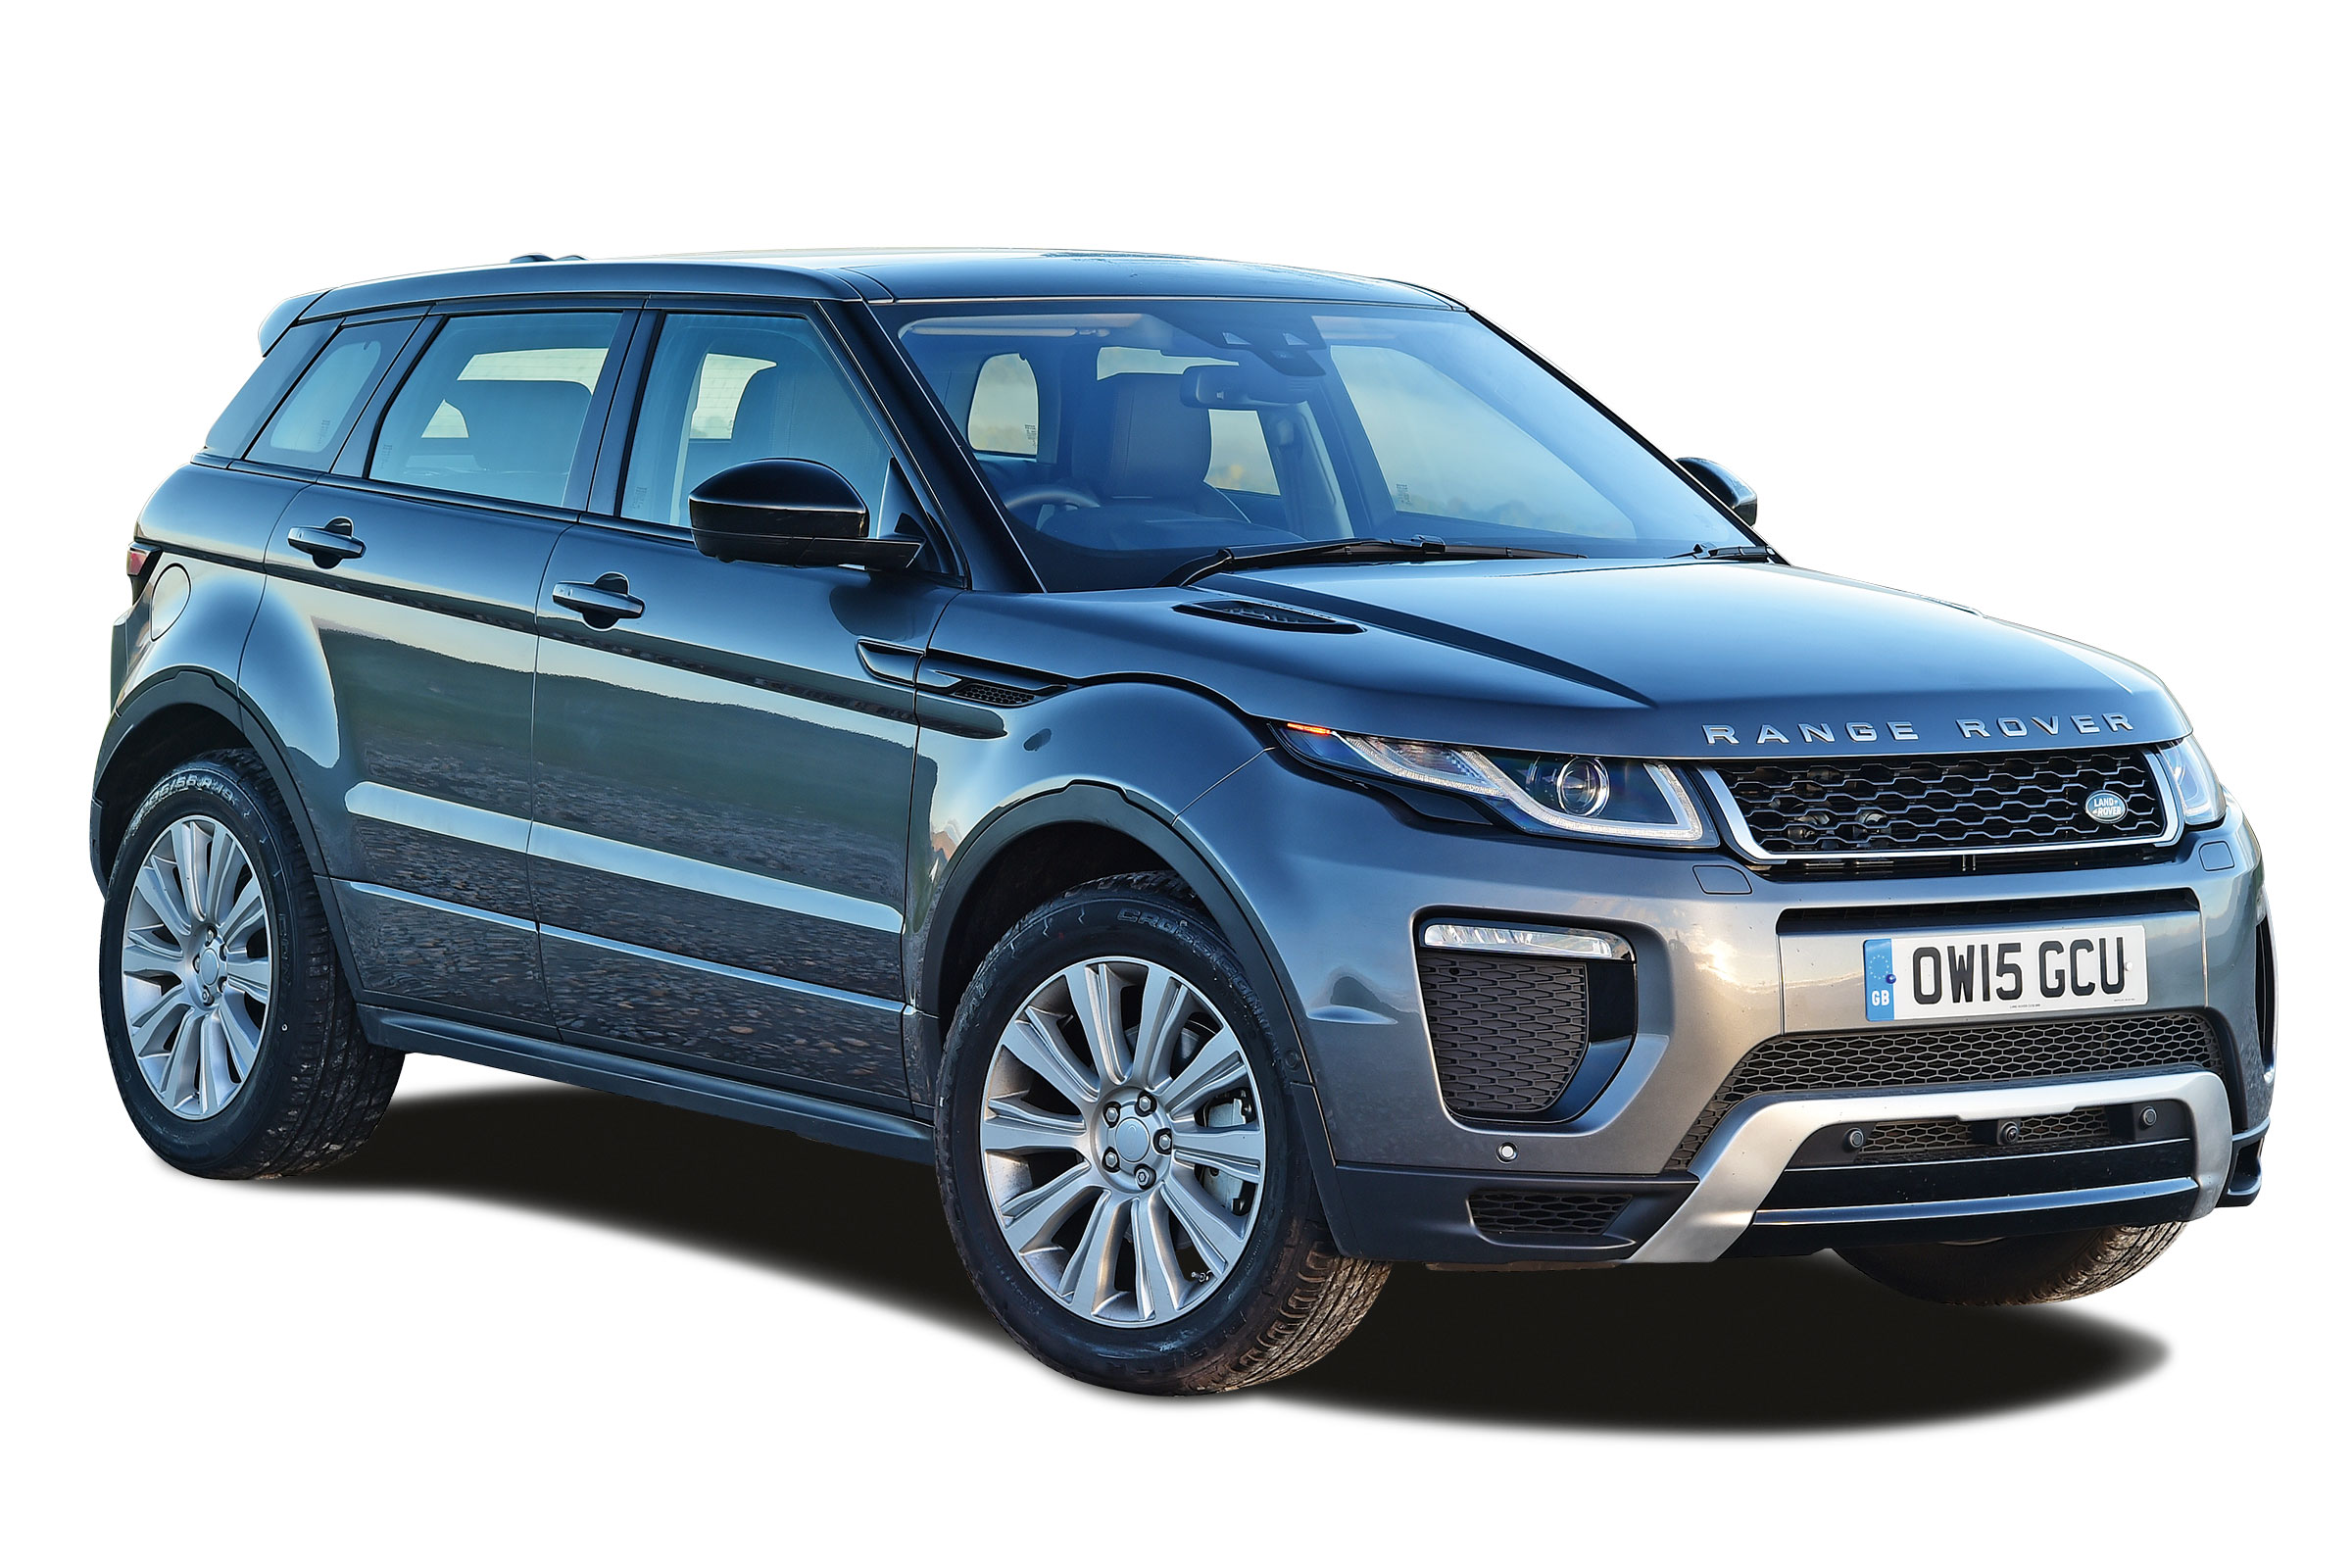 Range Rover Evoque SUV (2011-2018) | owner reviews: MPG, Problems